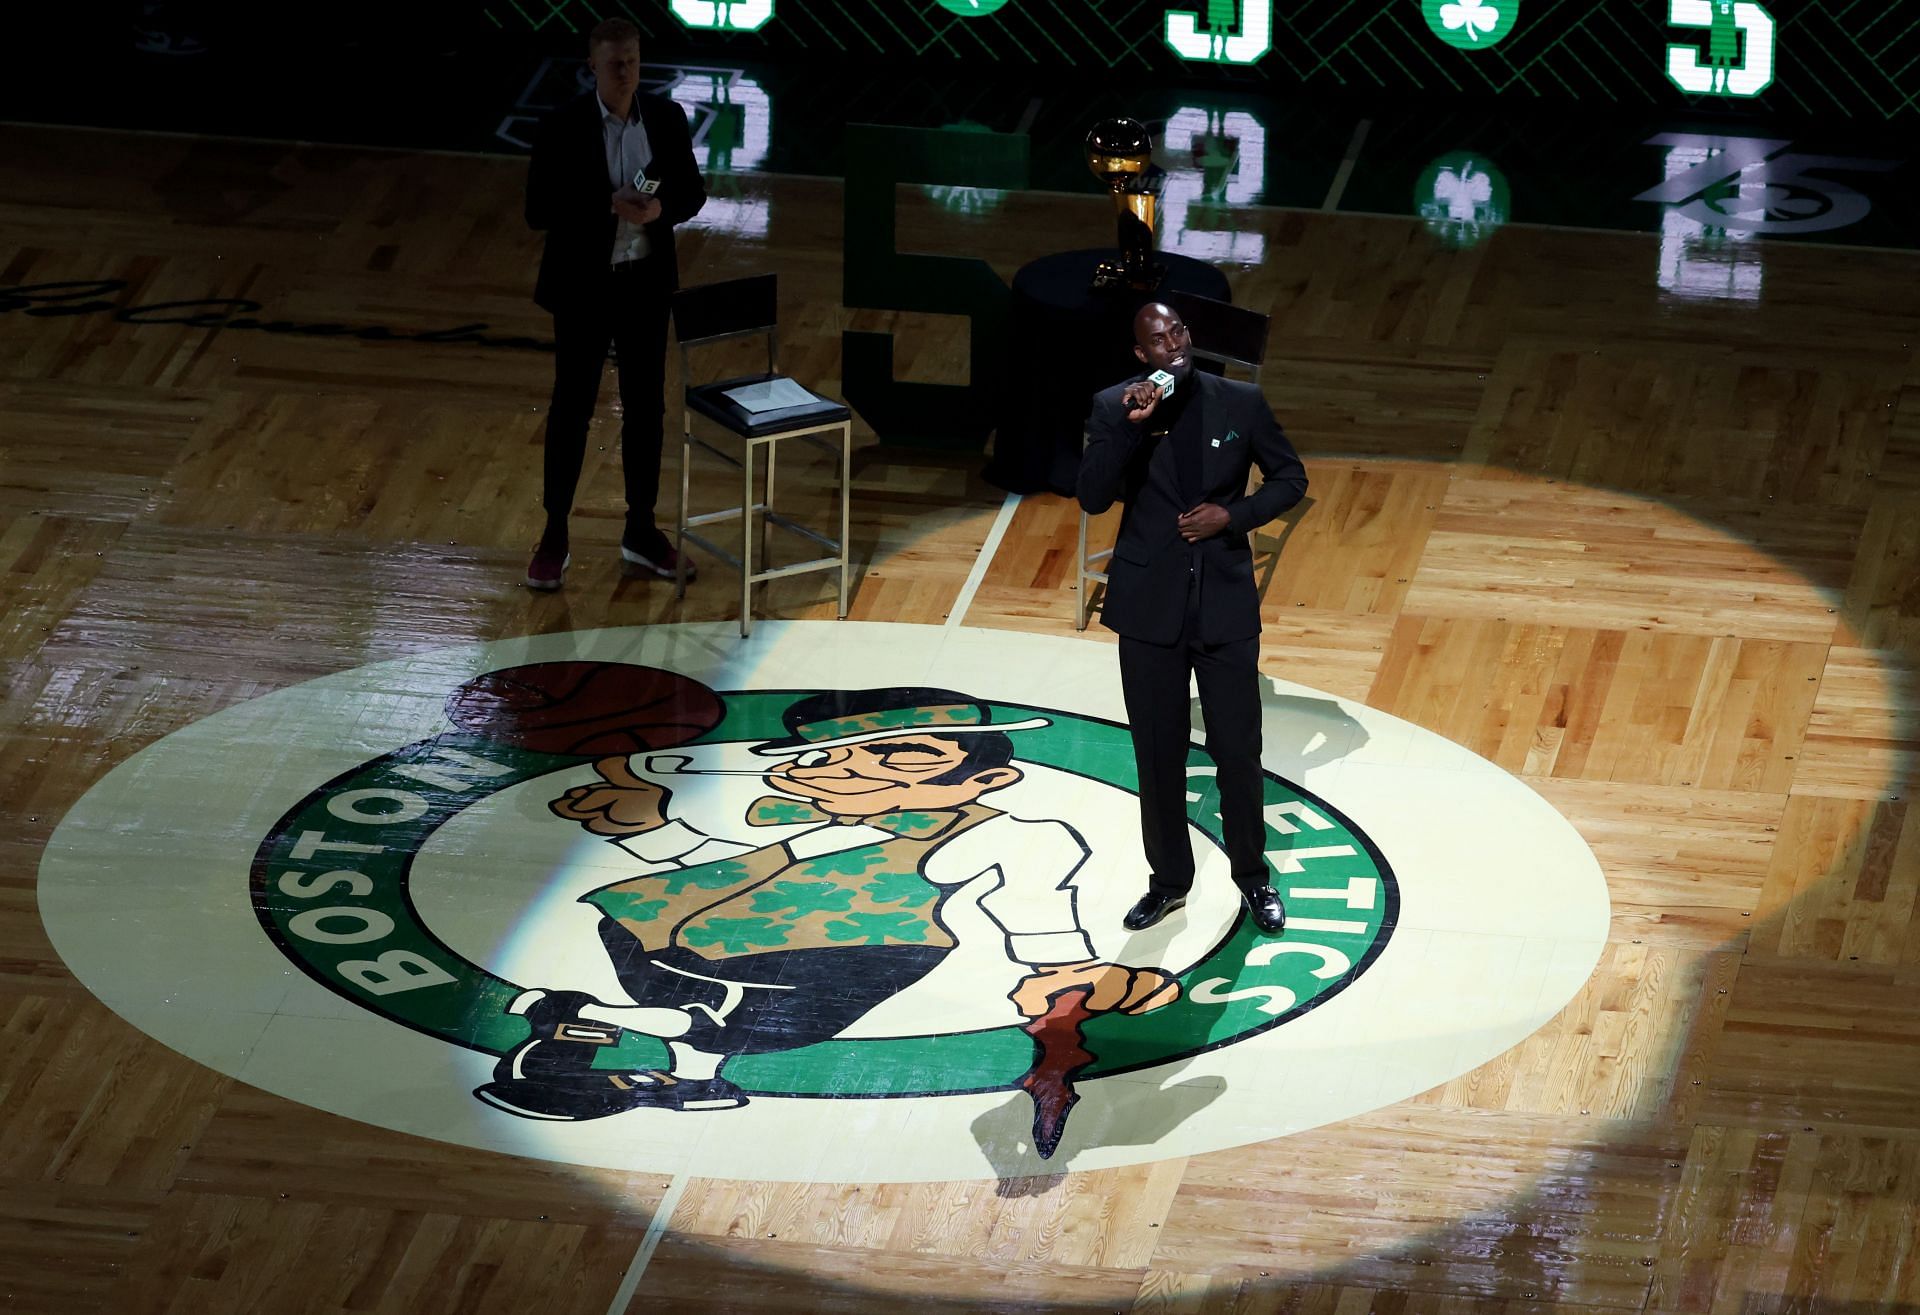 Former Boston Celtics player Kevin Garnett speaks to fans during his number retirement ceremony following the game between the Boston Celtics and the Dallas Mavericks at TD Garden on Sunday in Boston, Massachusetts.